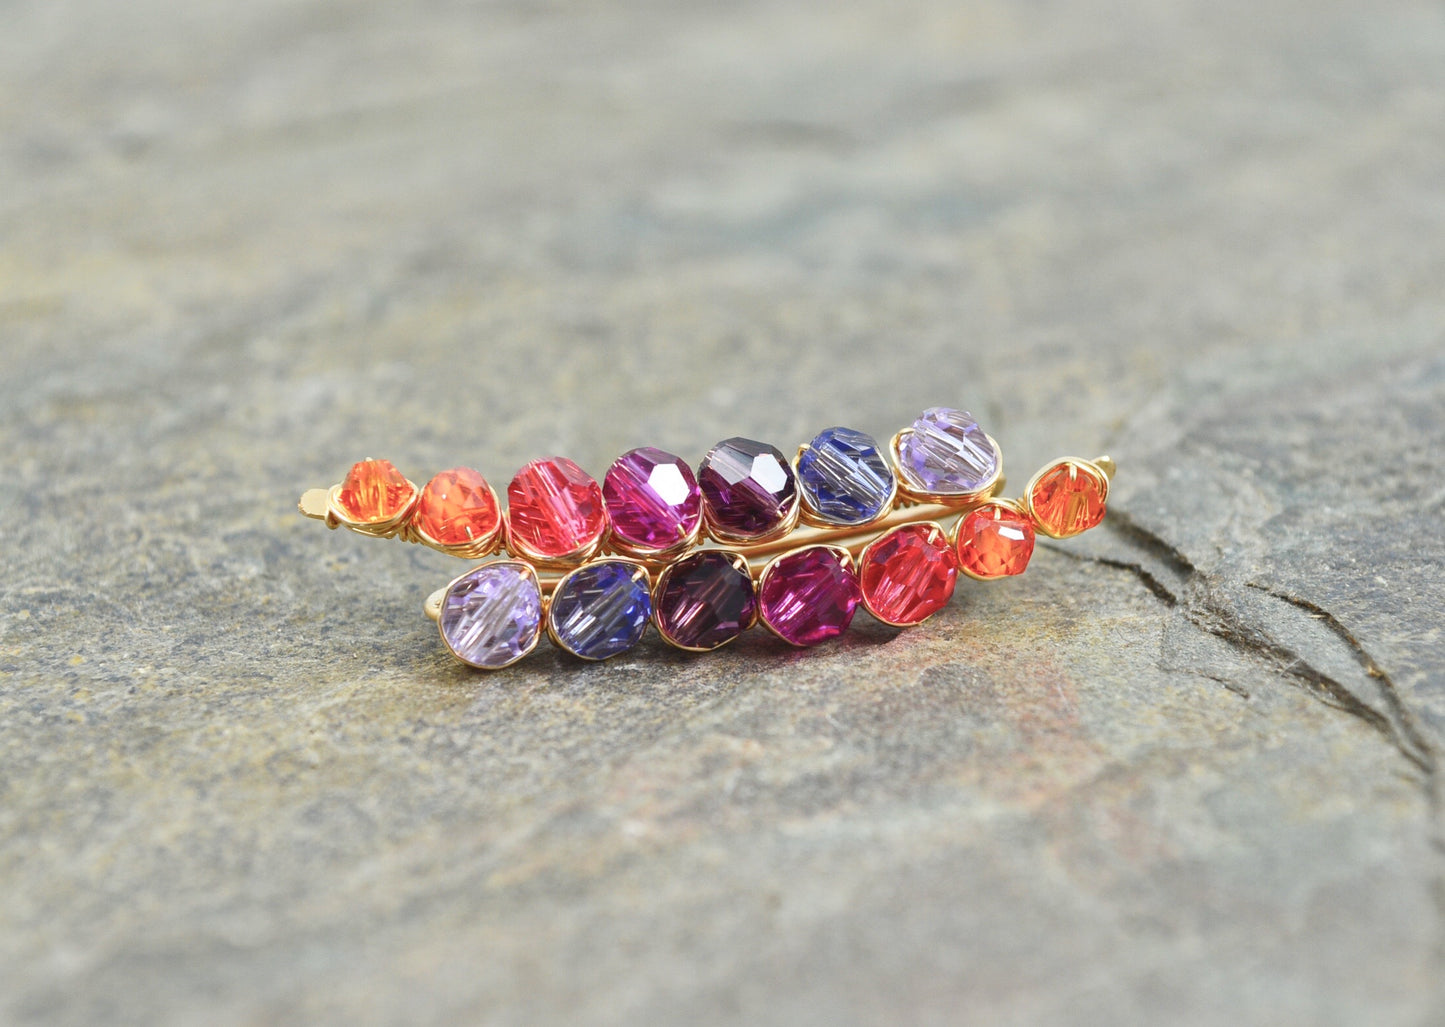 Sunset inspired ombré Crystal Ear Climbers in Sterling Silver or 14k Gold Fill, ear crawler earrings